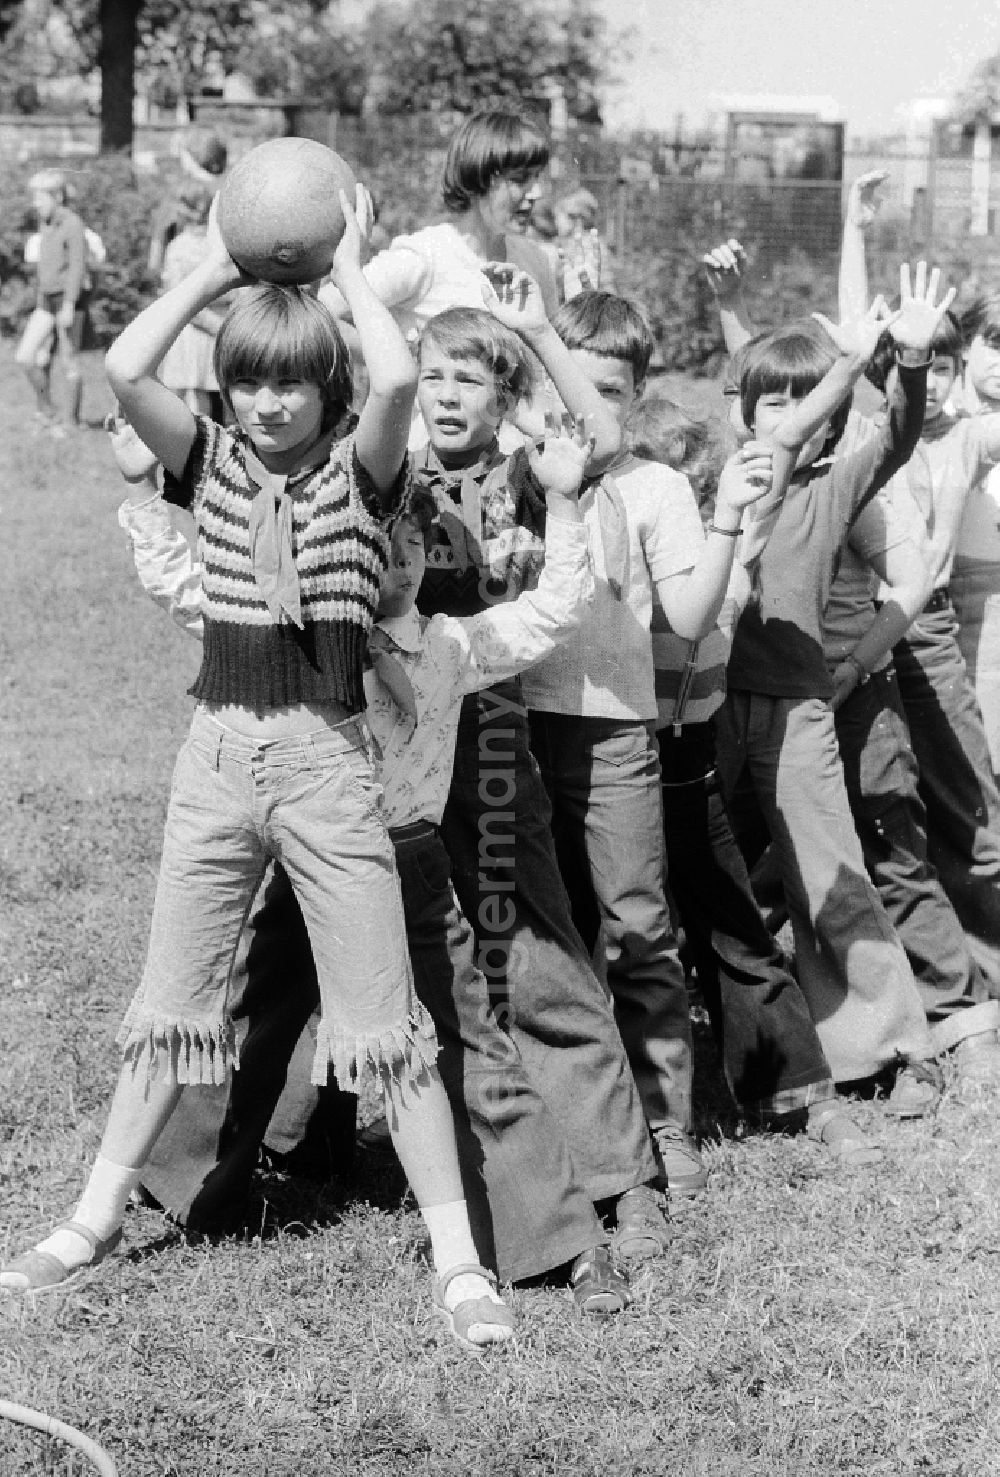 GDR picture archive: Berlin - Schoolgirls and schoolboys in the holiday's plays / hoard on the summer holidays in Berlin, the former capital of the GDR, German democratic republic. The holiday's plays were mainly for schoolboys first to the fourth class thought